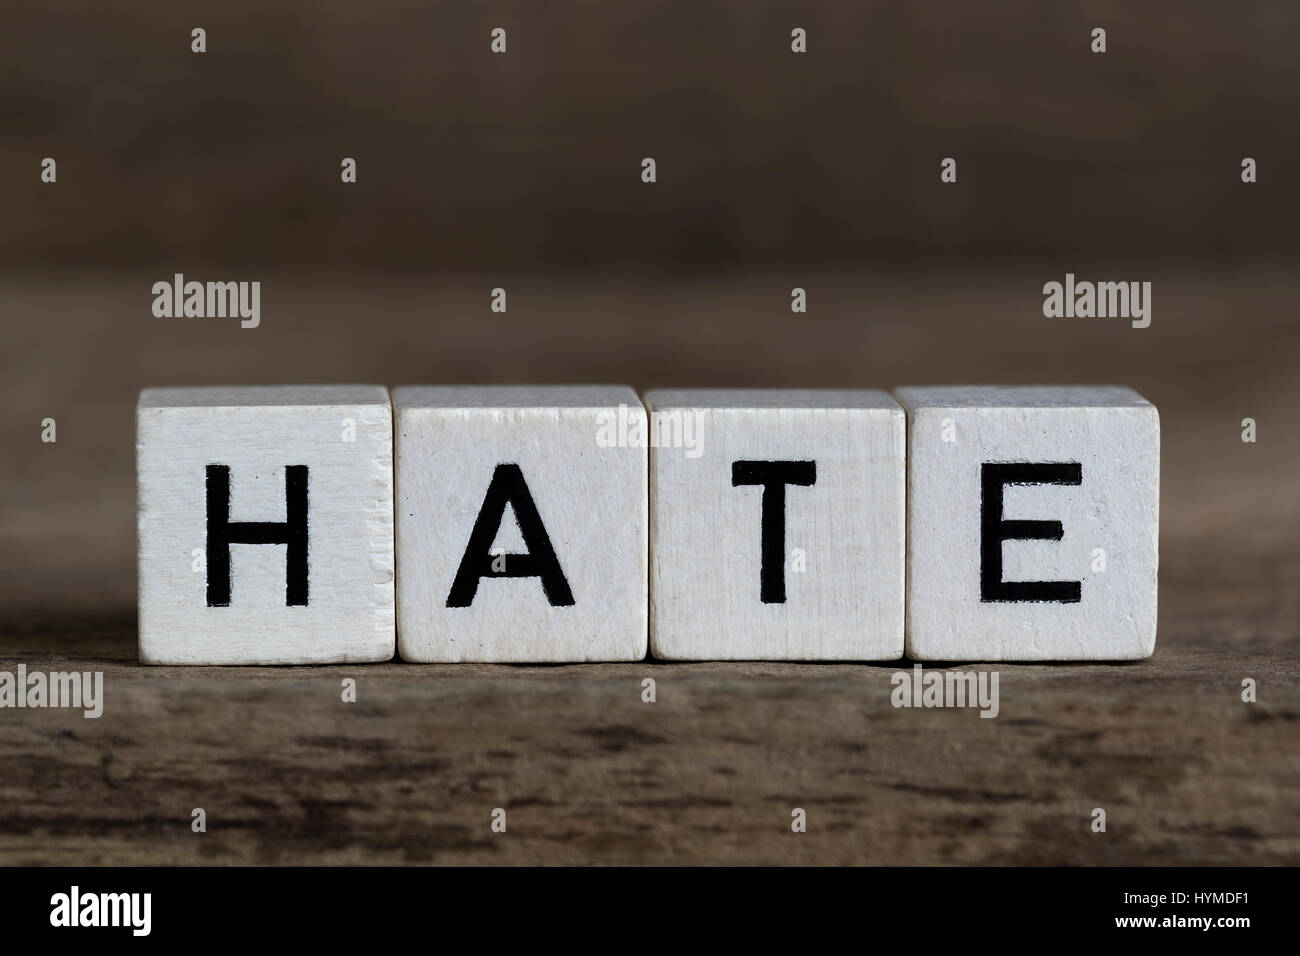 Hate, written in cubes on a wooden background Stock Photo